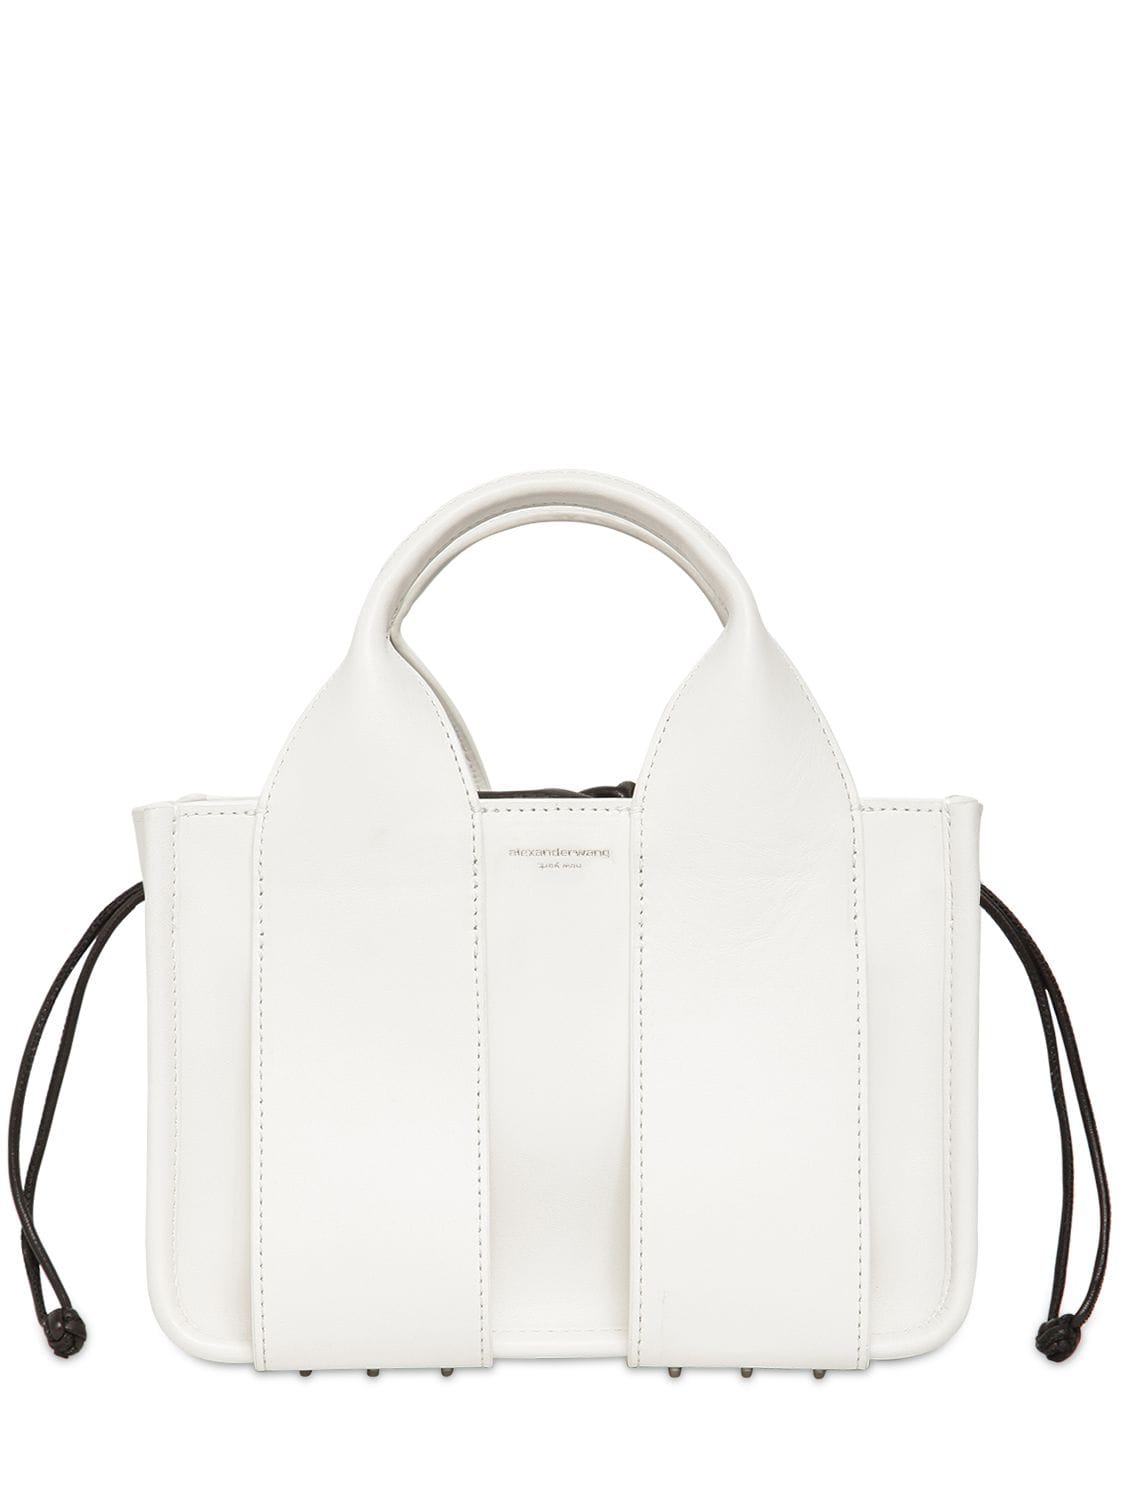 ALEXANDER WANG SMALL ROCCO LEATHER TOTE BAG,71IRLW039-MTAW0